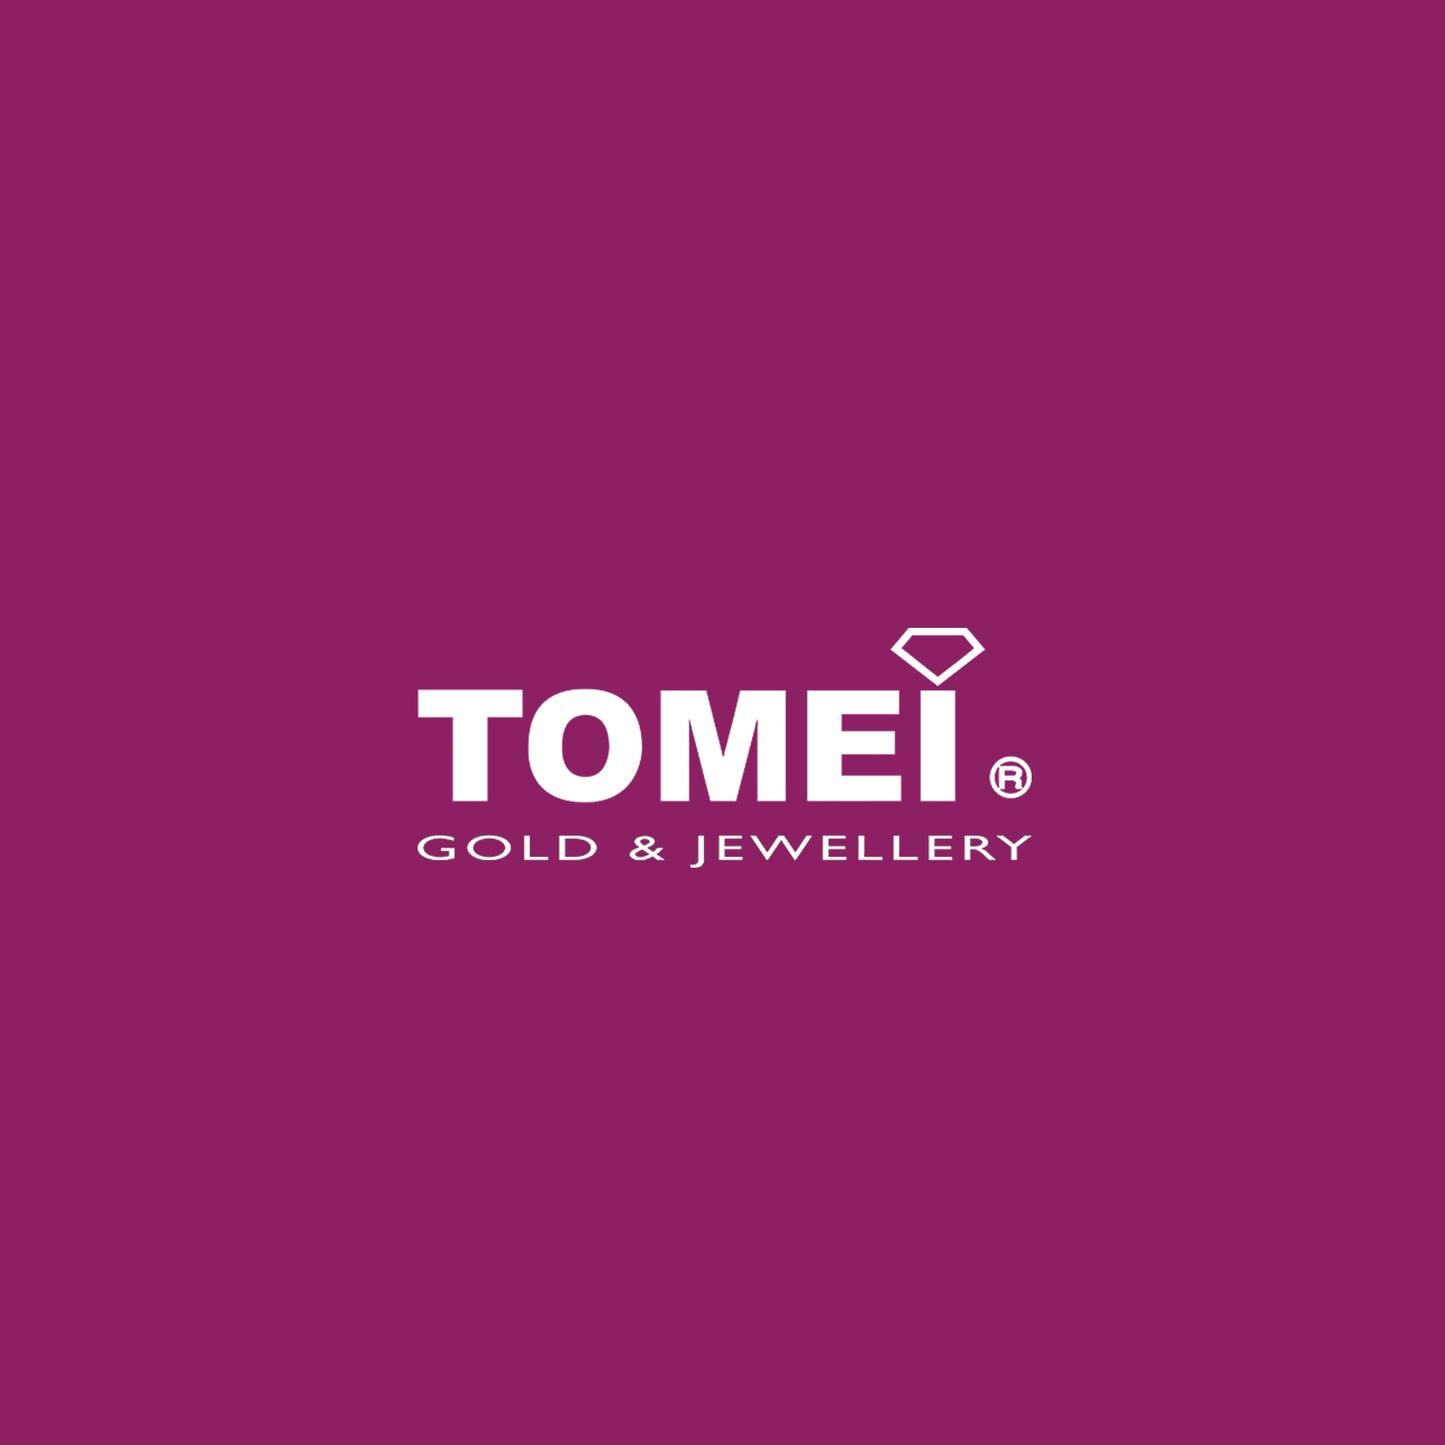 TOMEI Earrings of Fiery Floriated Delights, Yellow Gold 916 (9Q-YG1213E-EC) (5.68G)